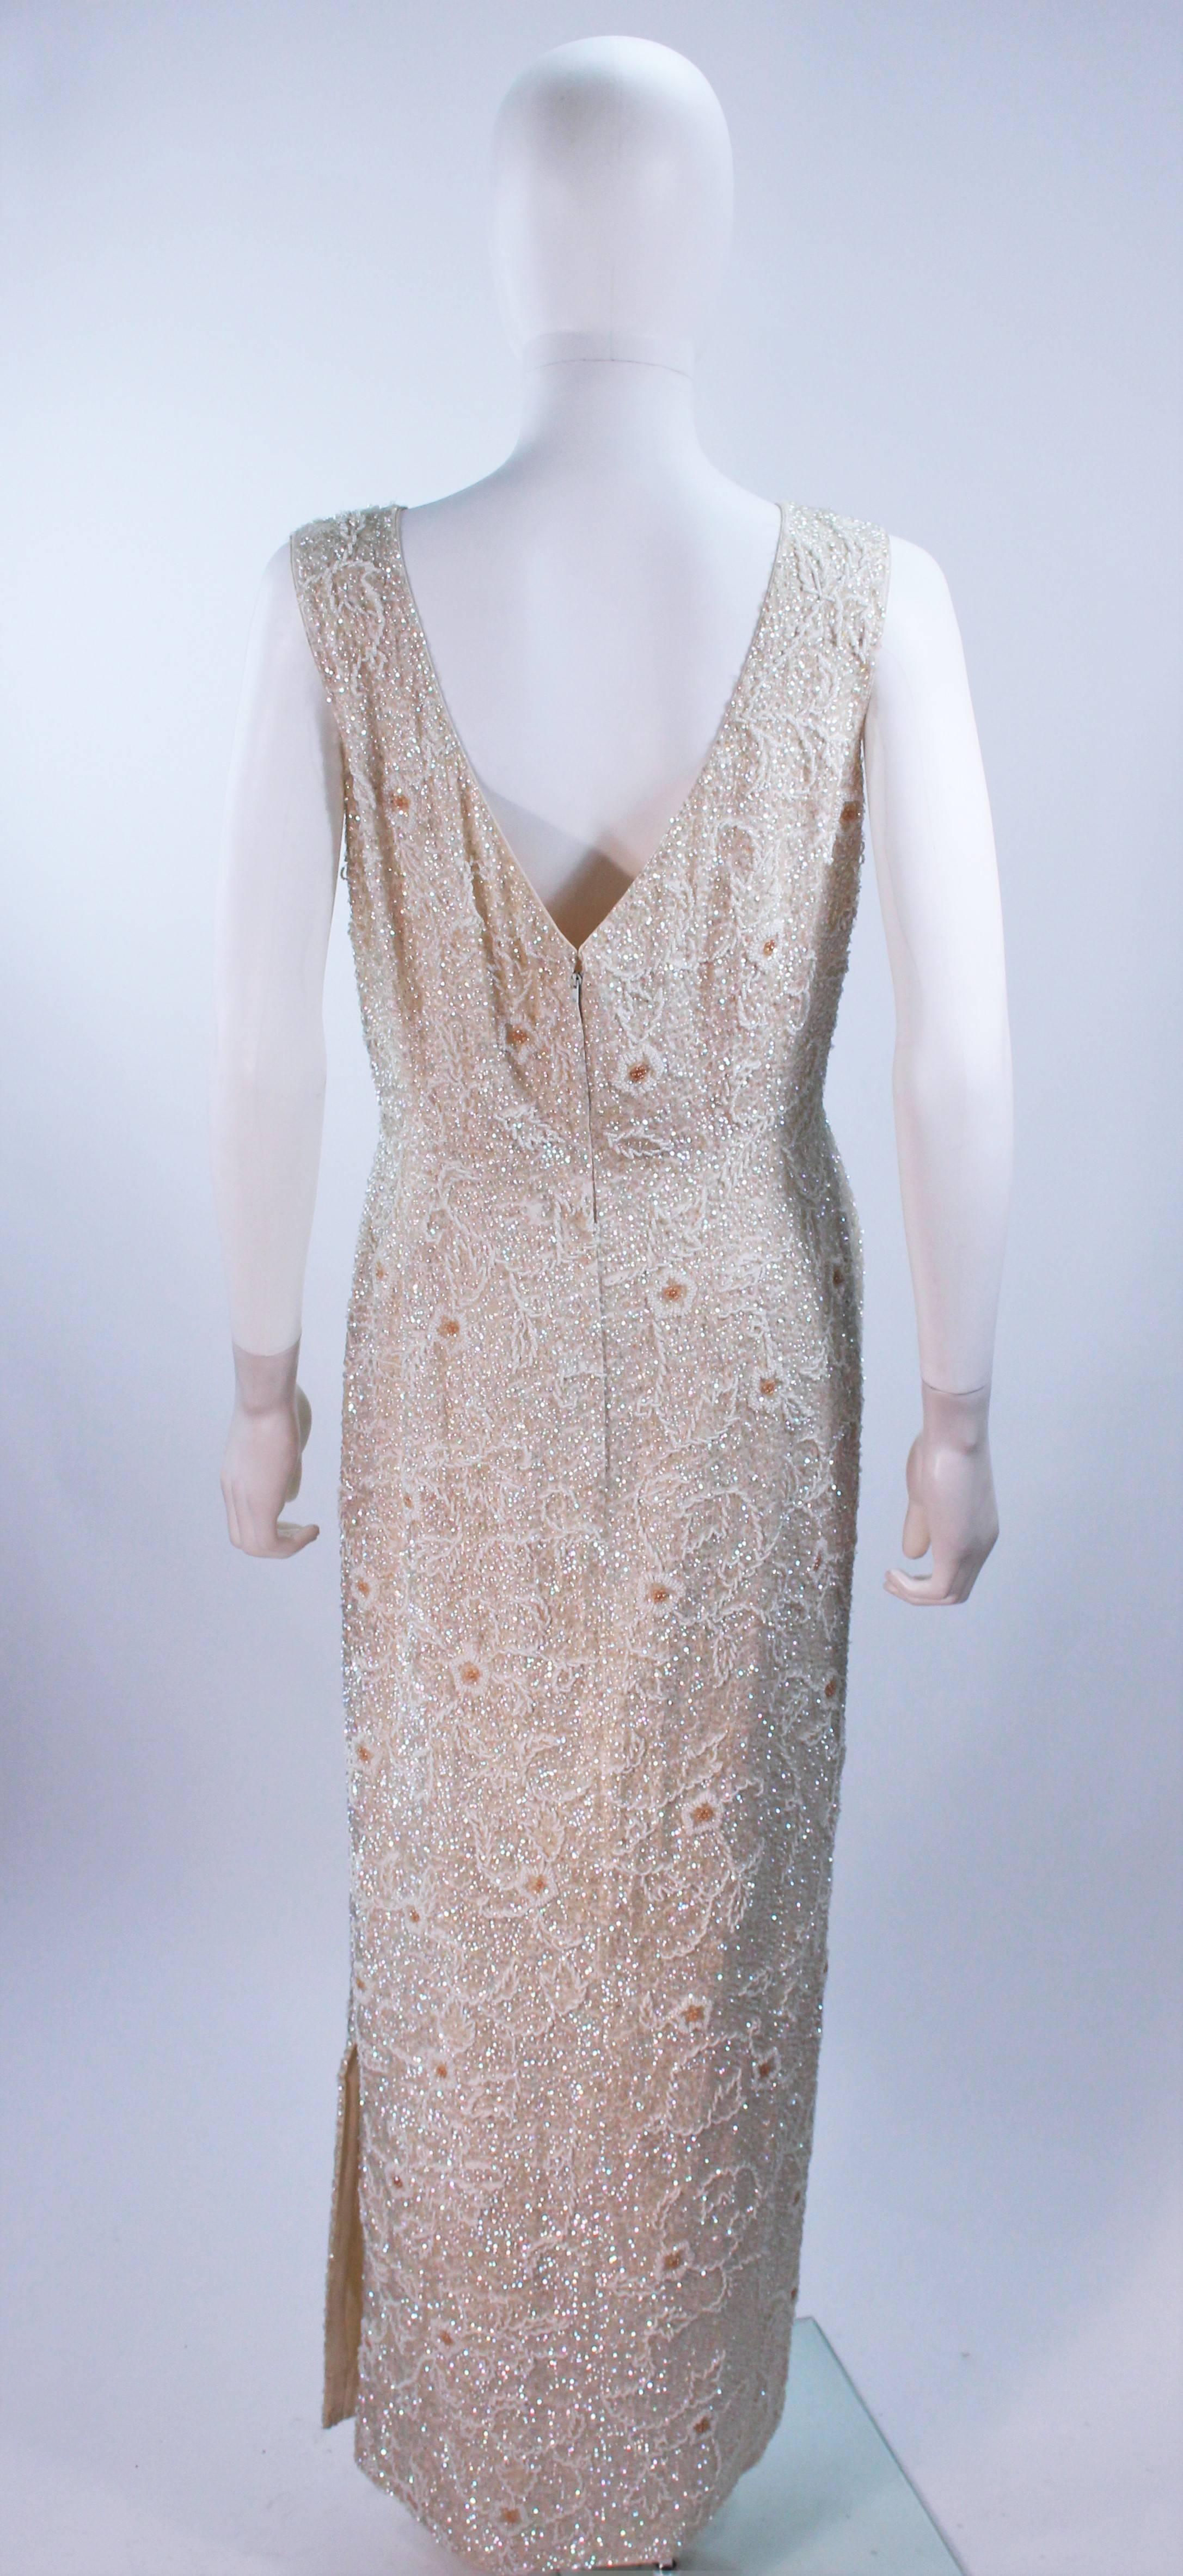 JO RO IMPORTS 1950's White Iridescent Floral Sequin Beaded Gown Wedding Size 14 For Sale 1